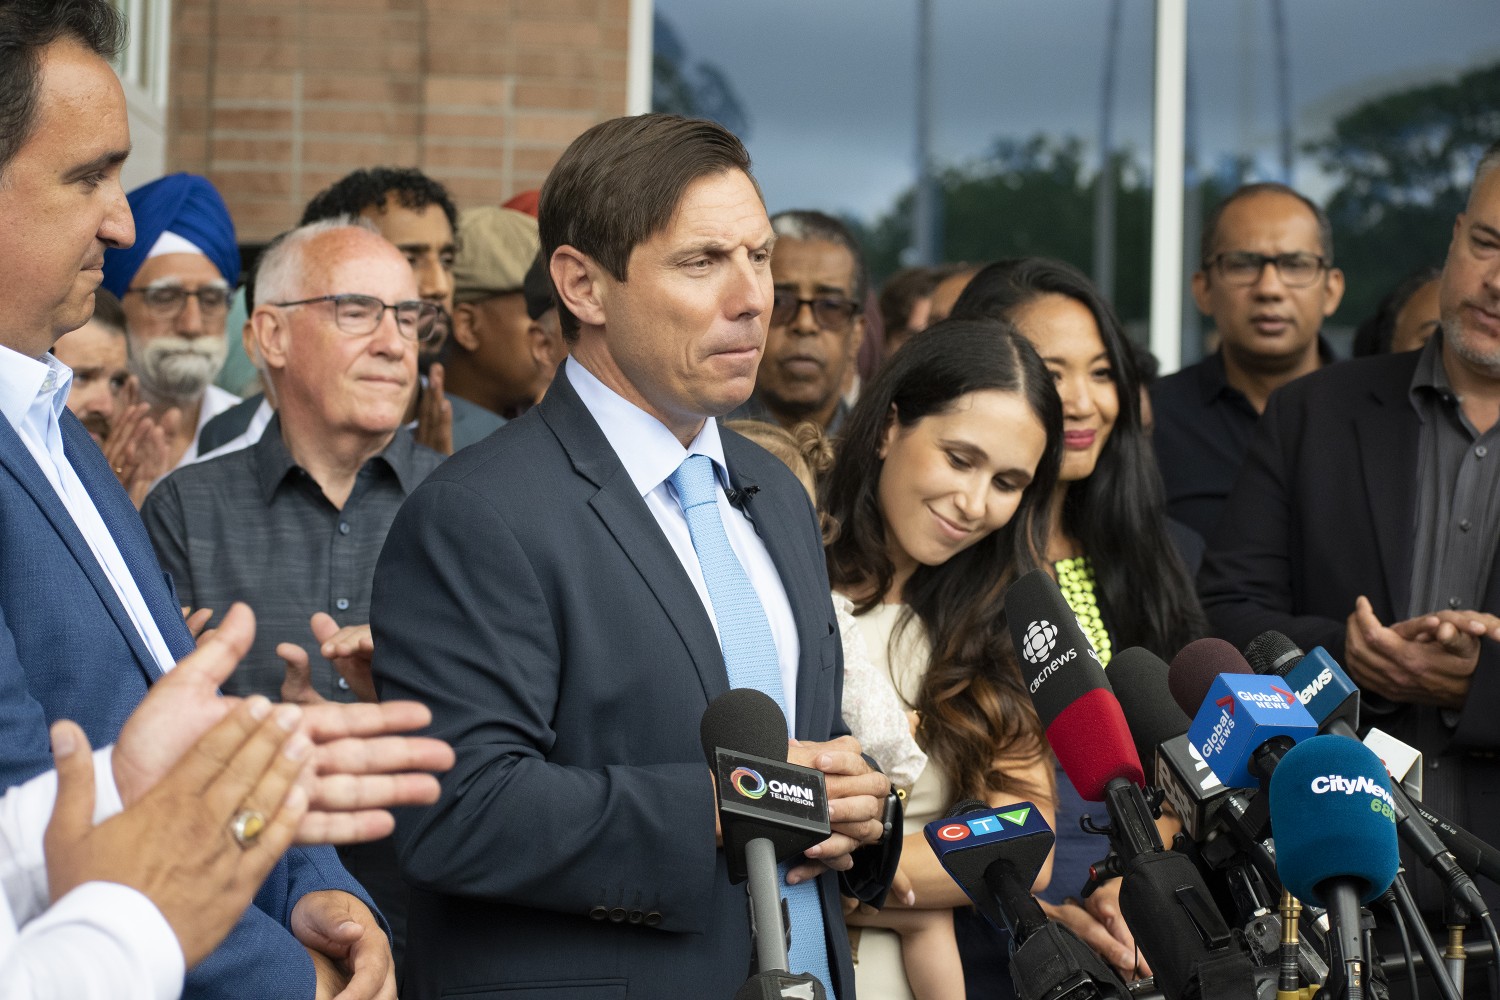 With multiple misconduct allegations hanging over Patrick Brown, mayoral reelection announcement filled with deflections & denials